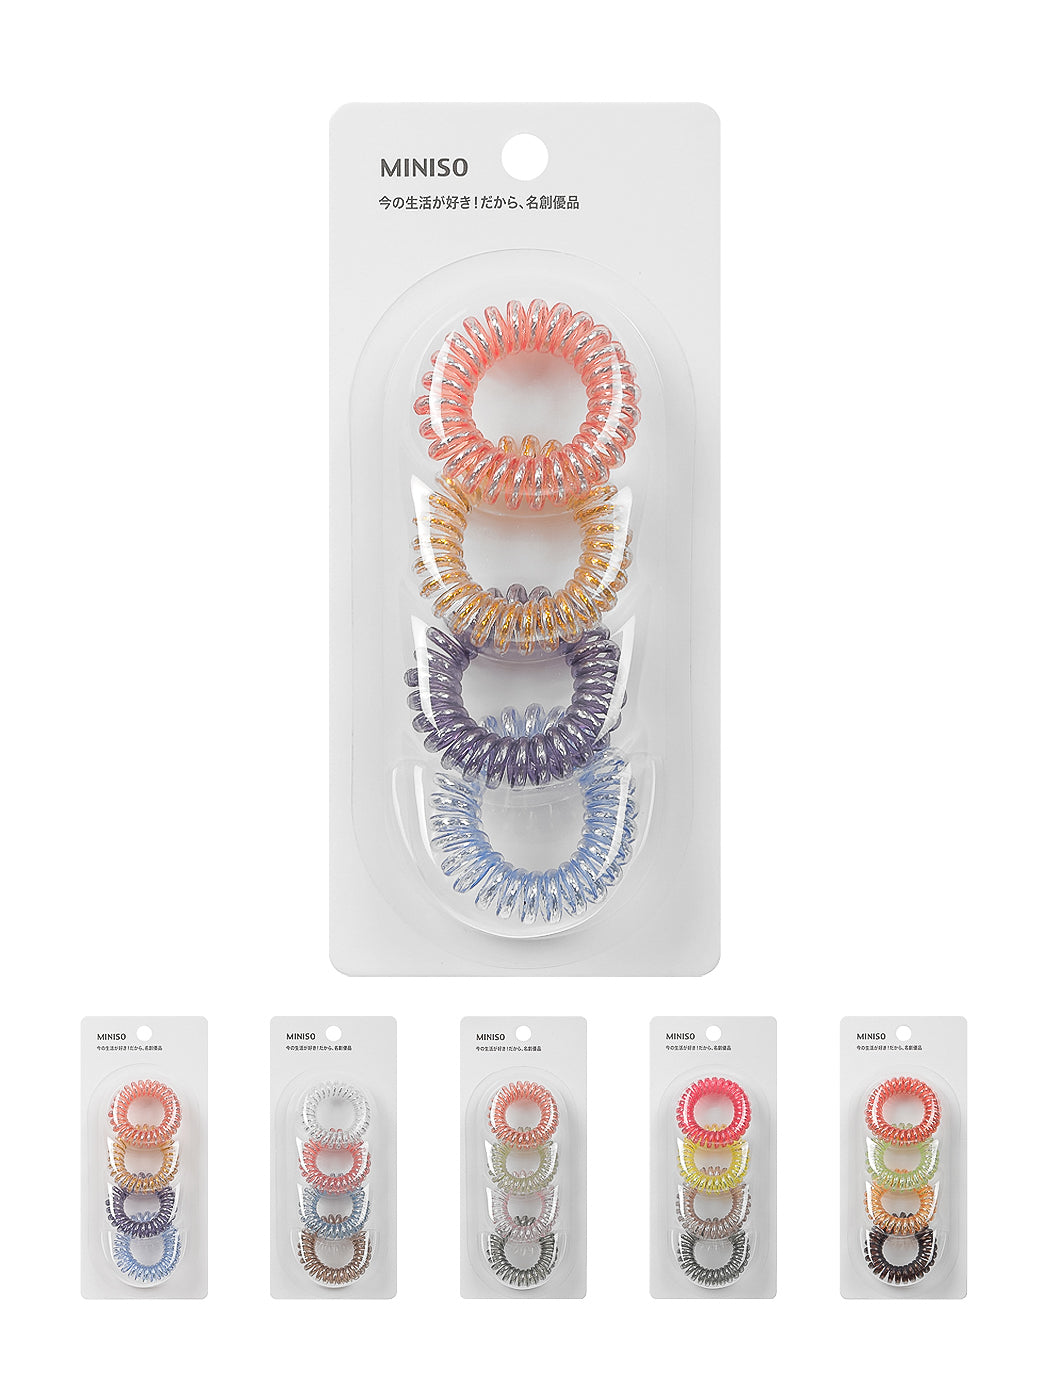 MINISO 4.0 COLORED SPIRAL HAIR TIES (4PCS) 2009806810101 HAIR TIE